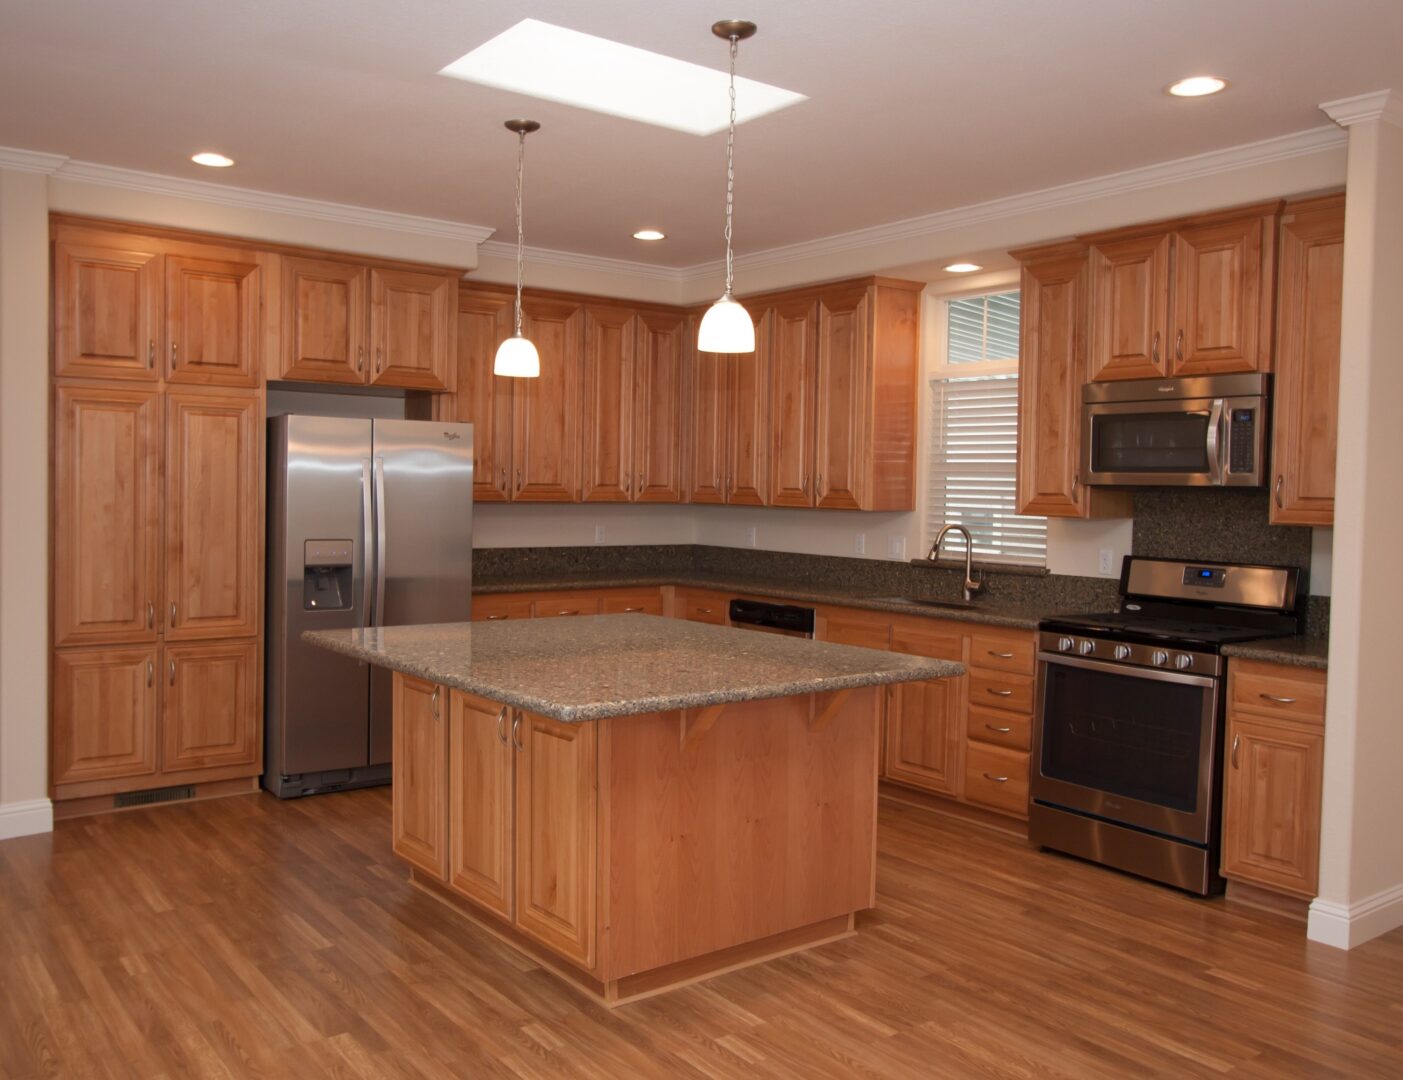 A brown and gray kitchen